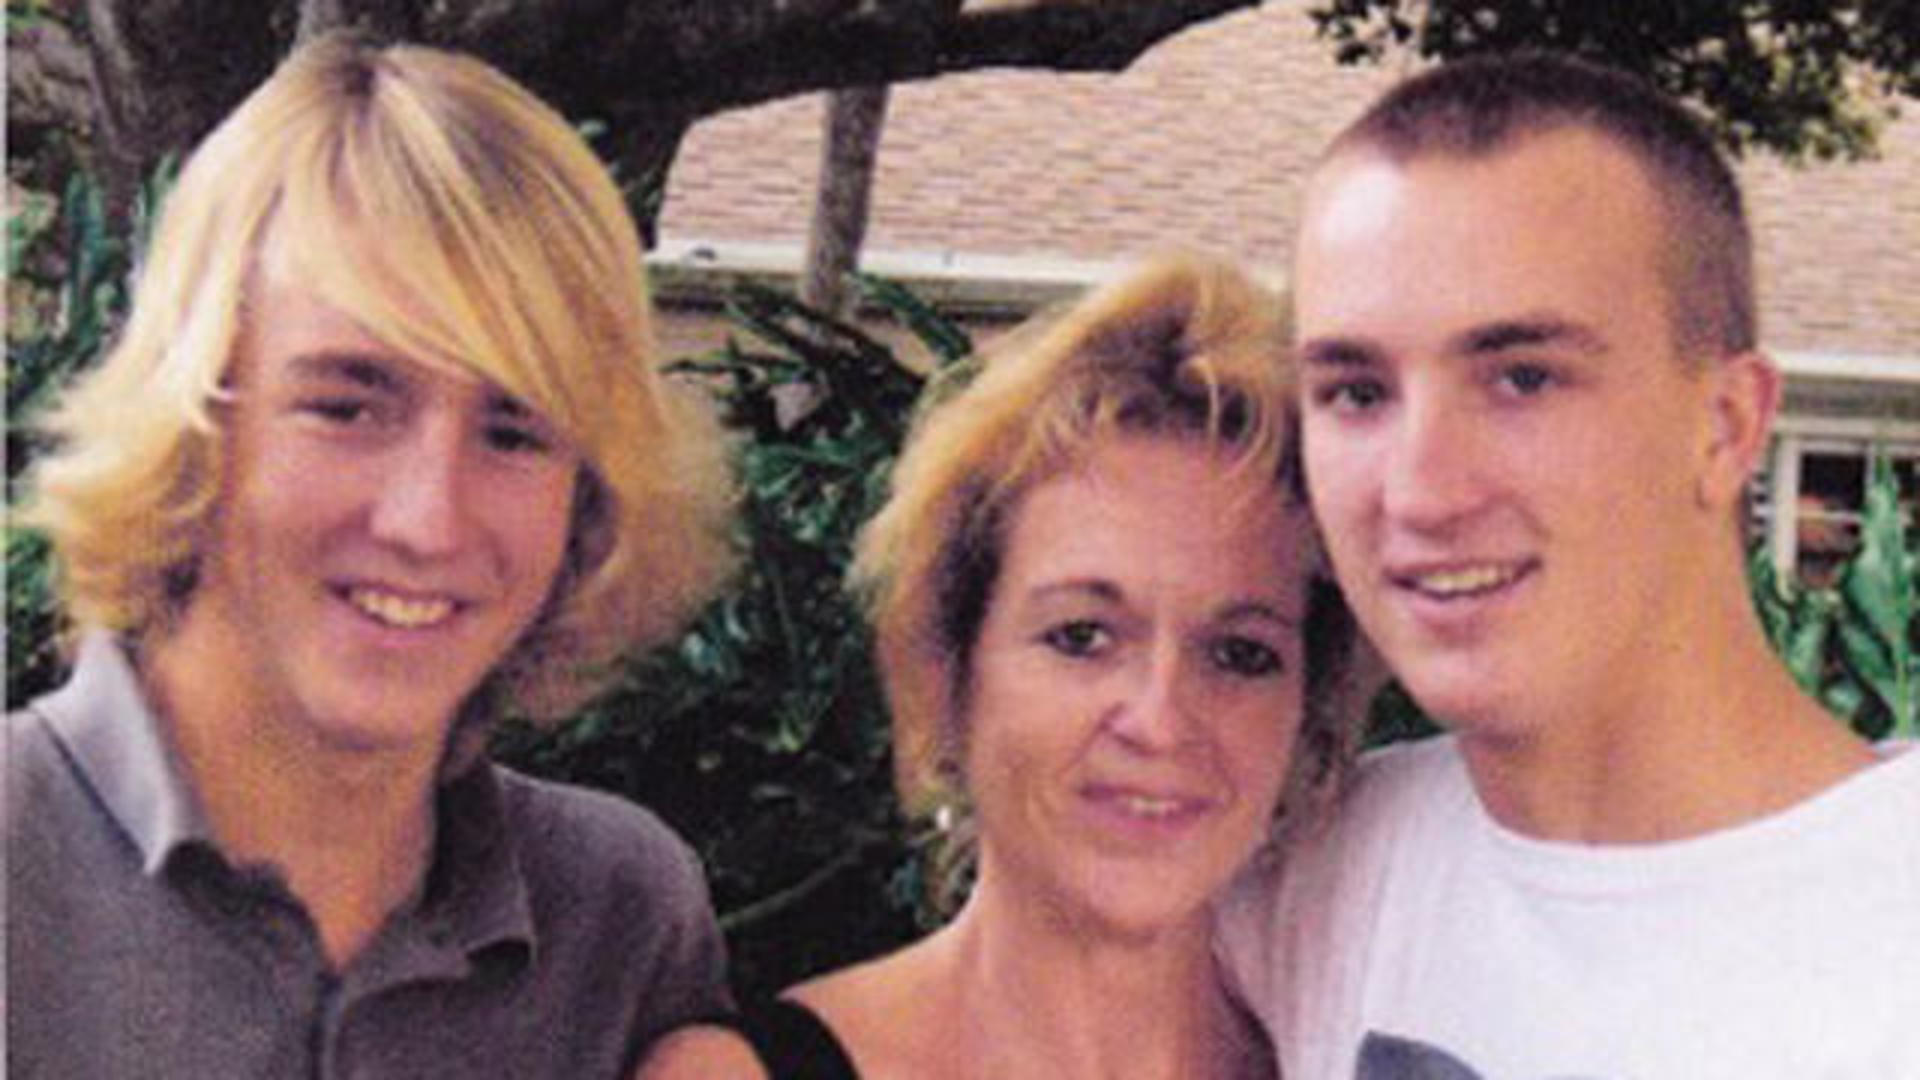 Sheila Trott's sons interviewed by police